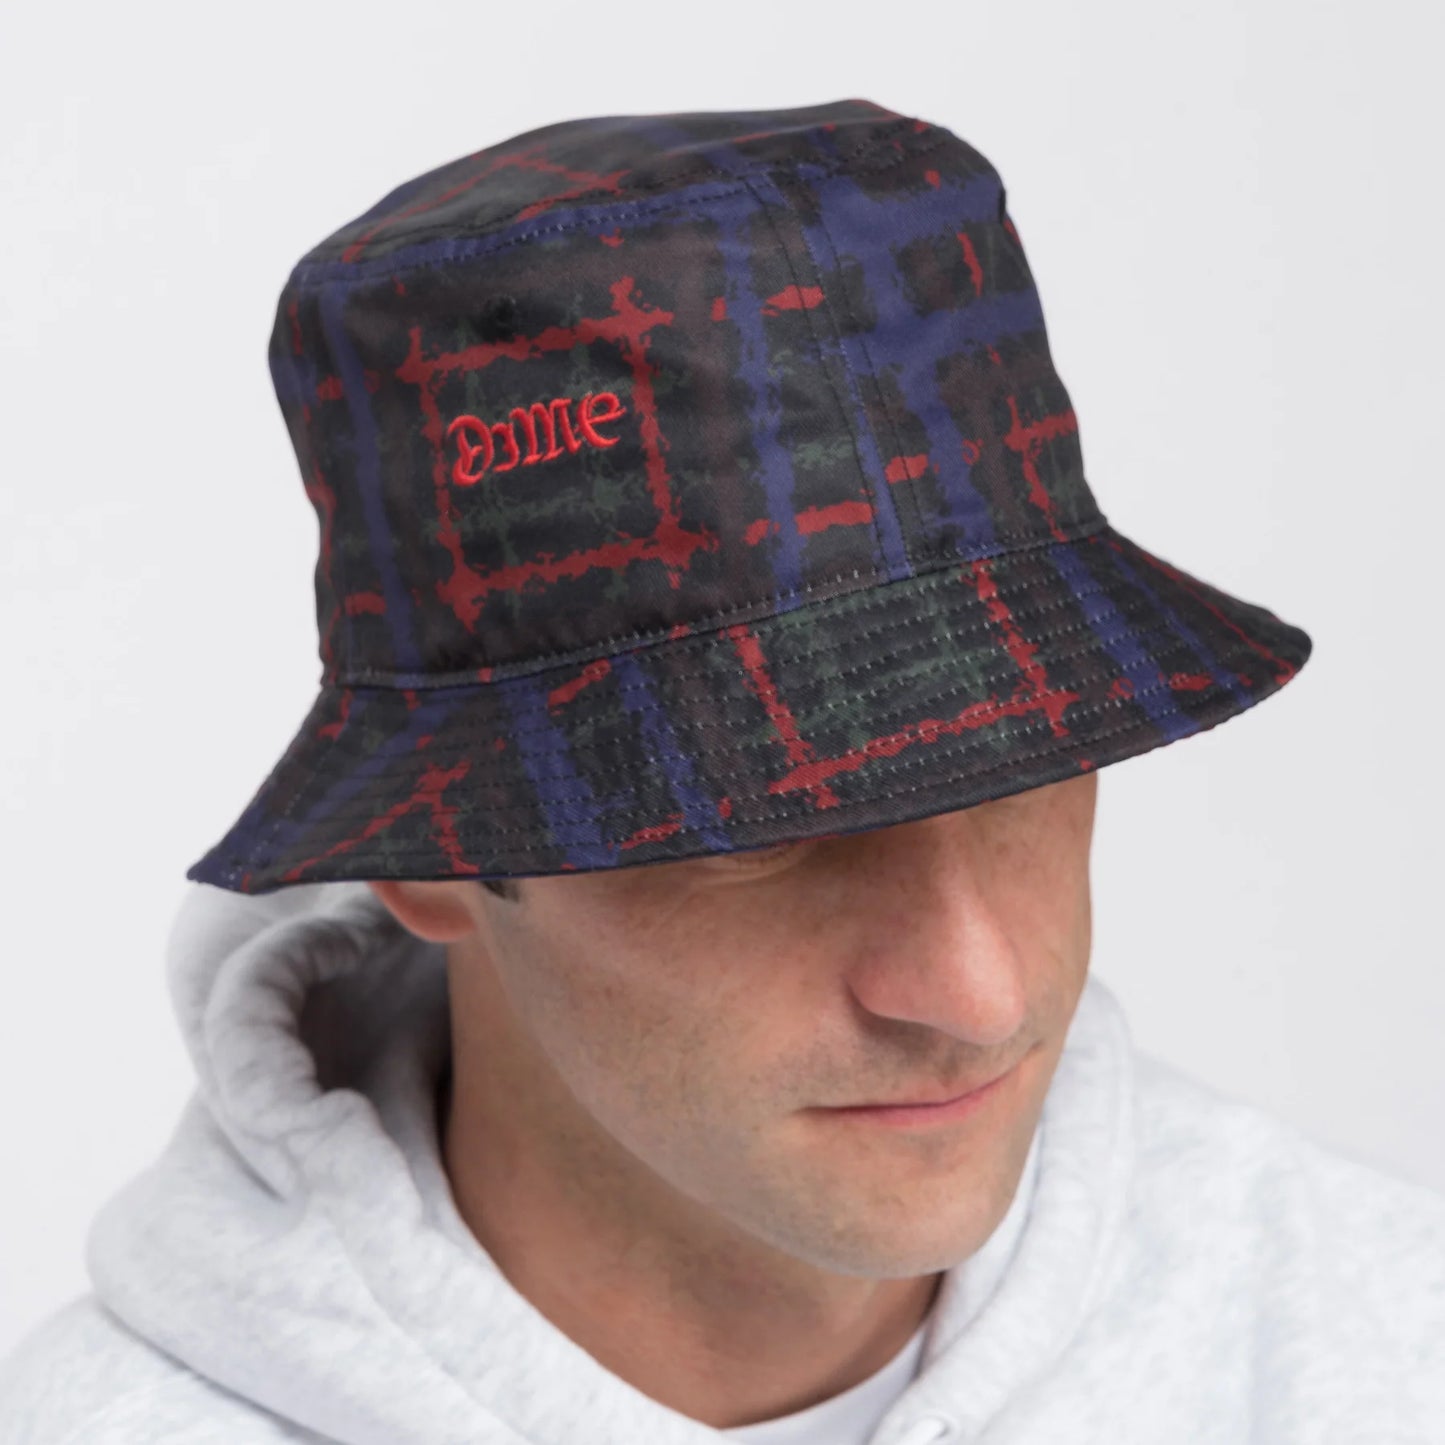 Resort Plaid Bucket Hat OS(color options listed)